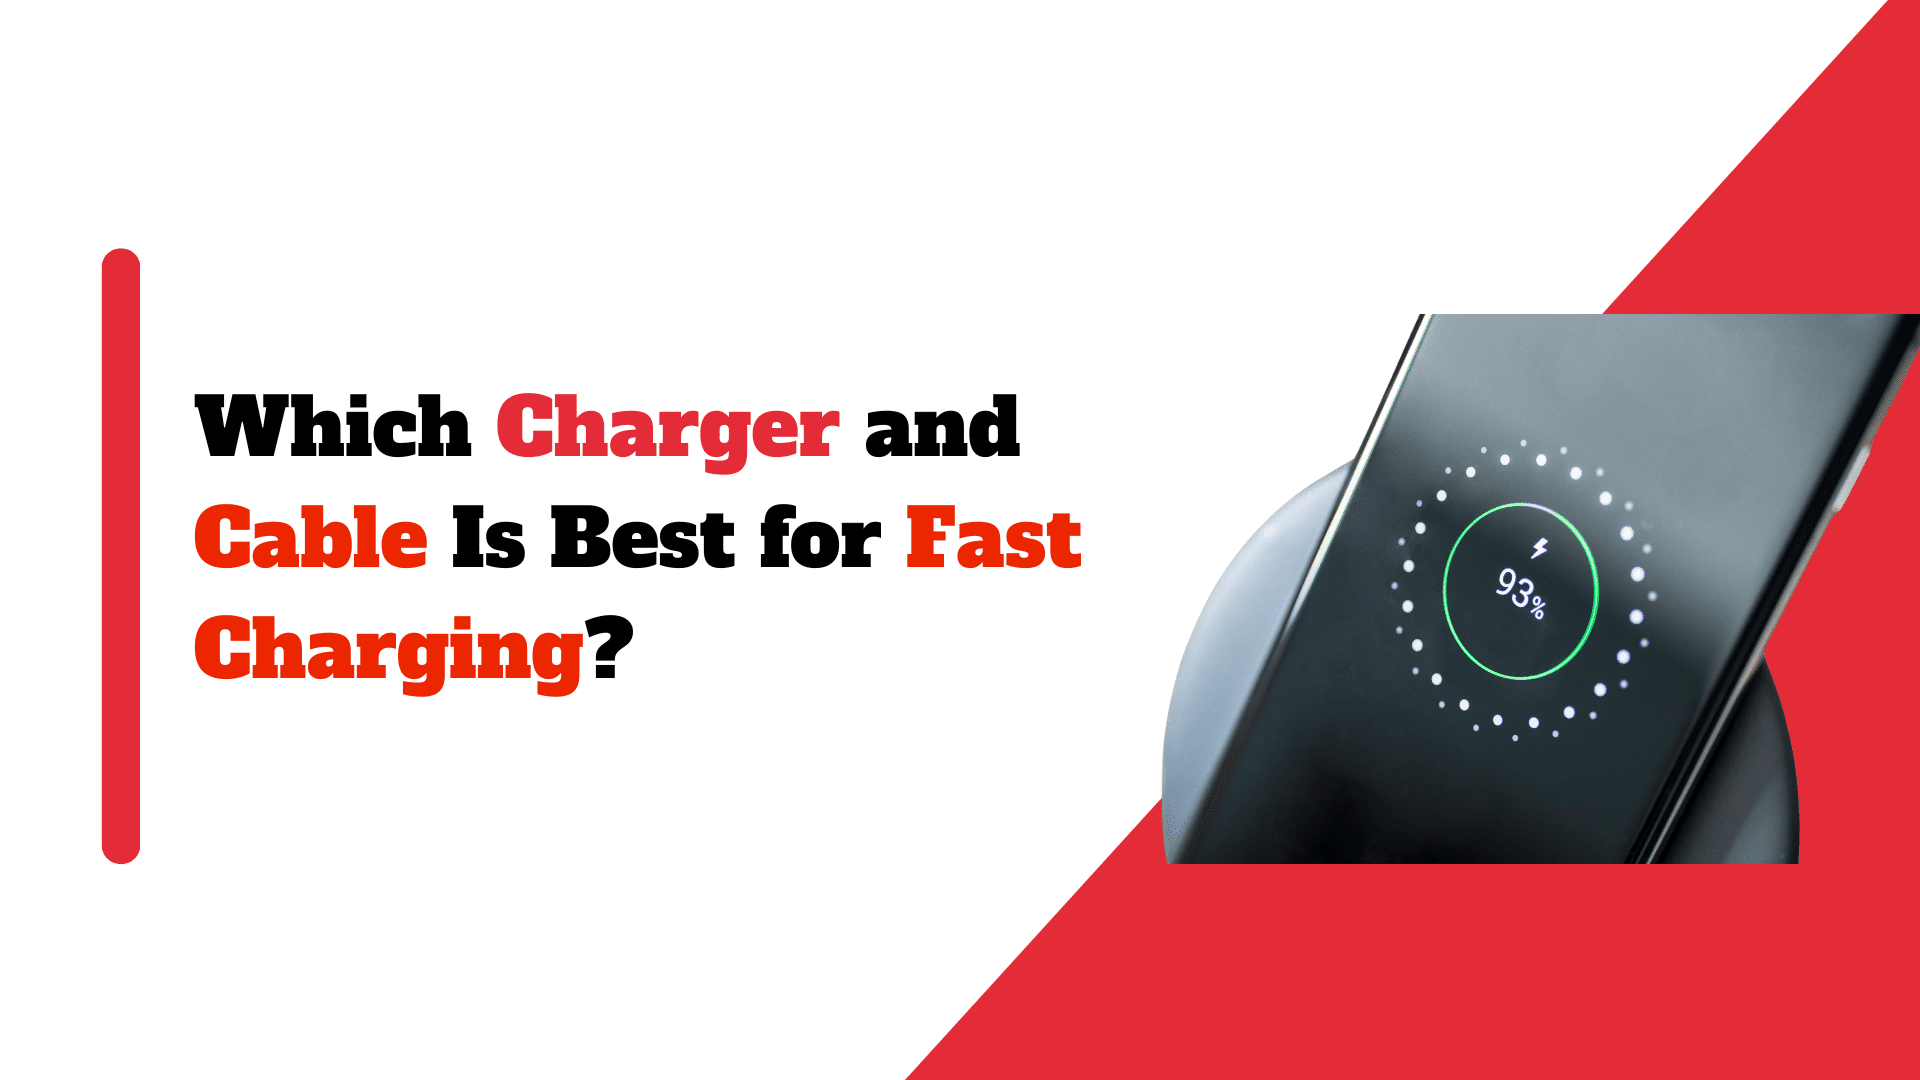 Which Charger and Cable Is Best for Fast Charging